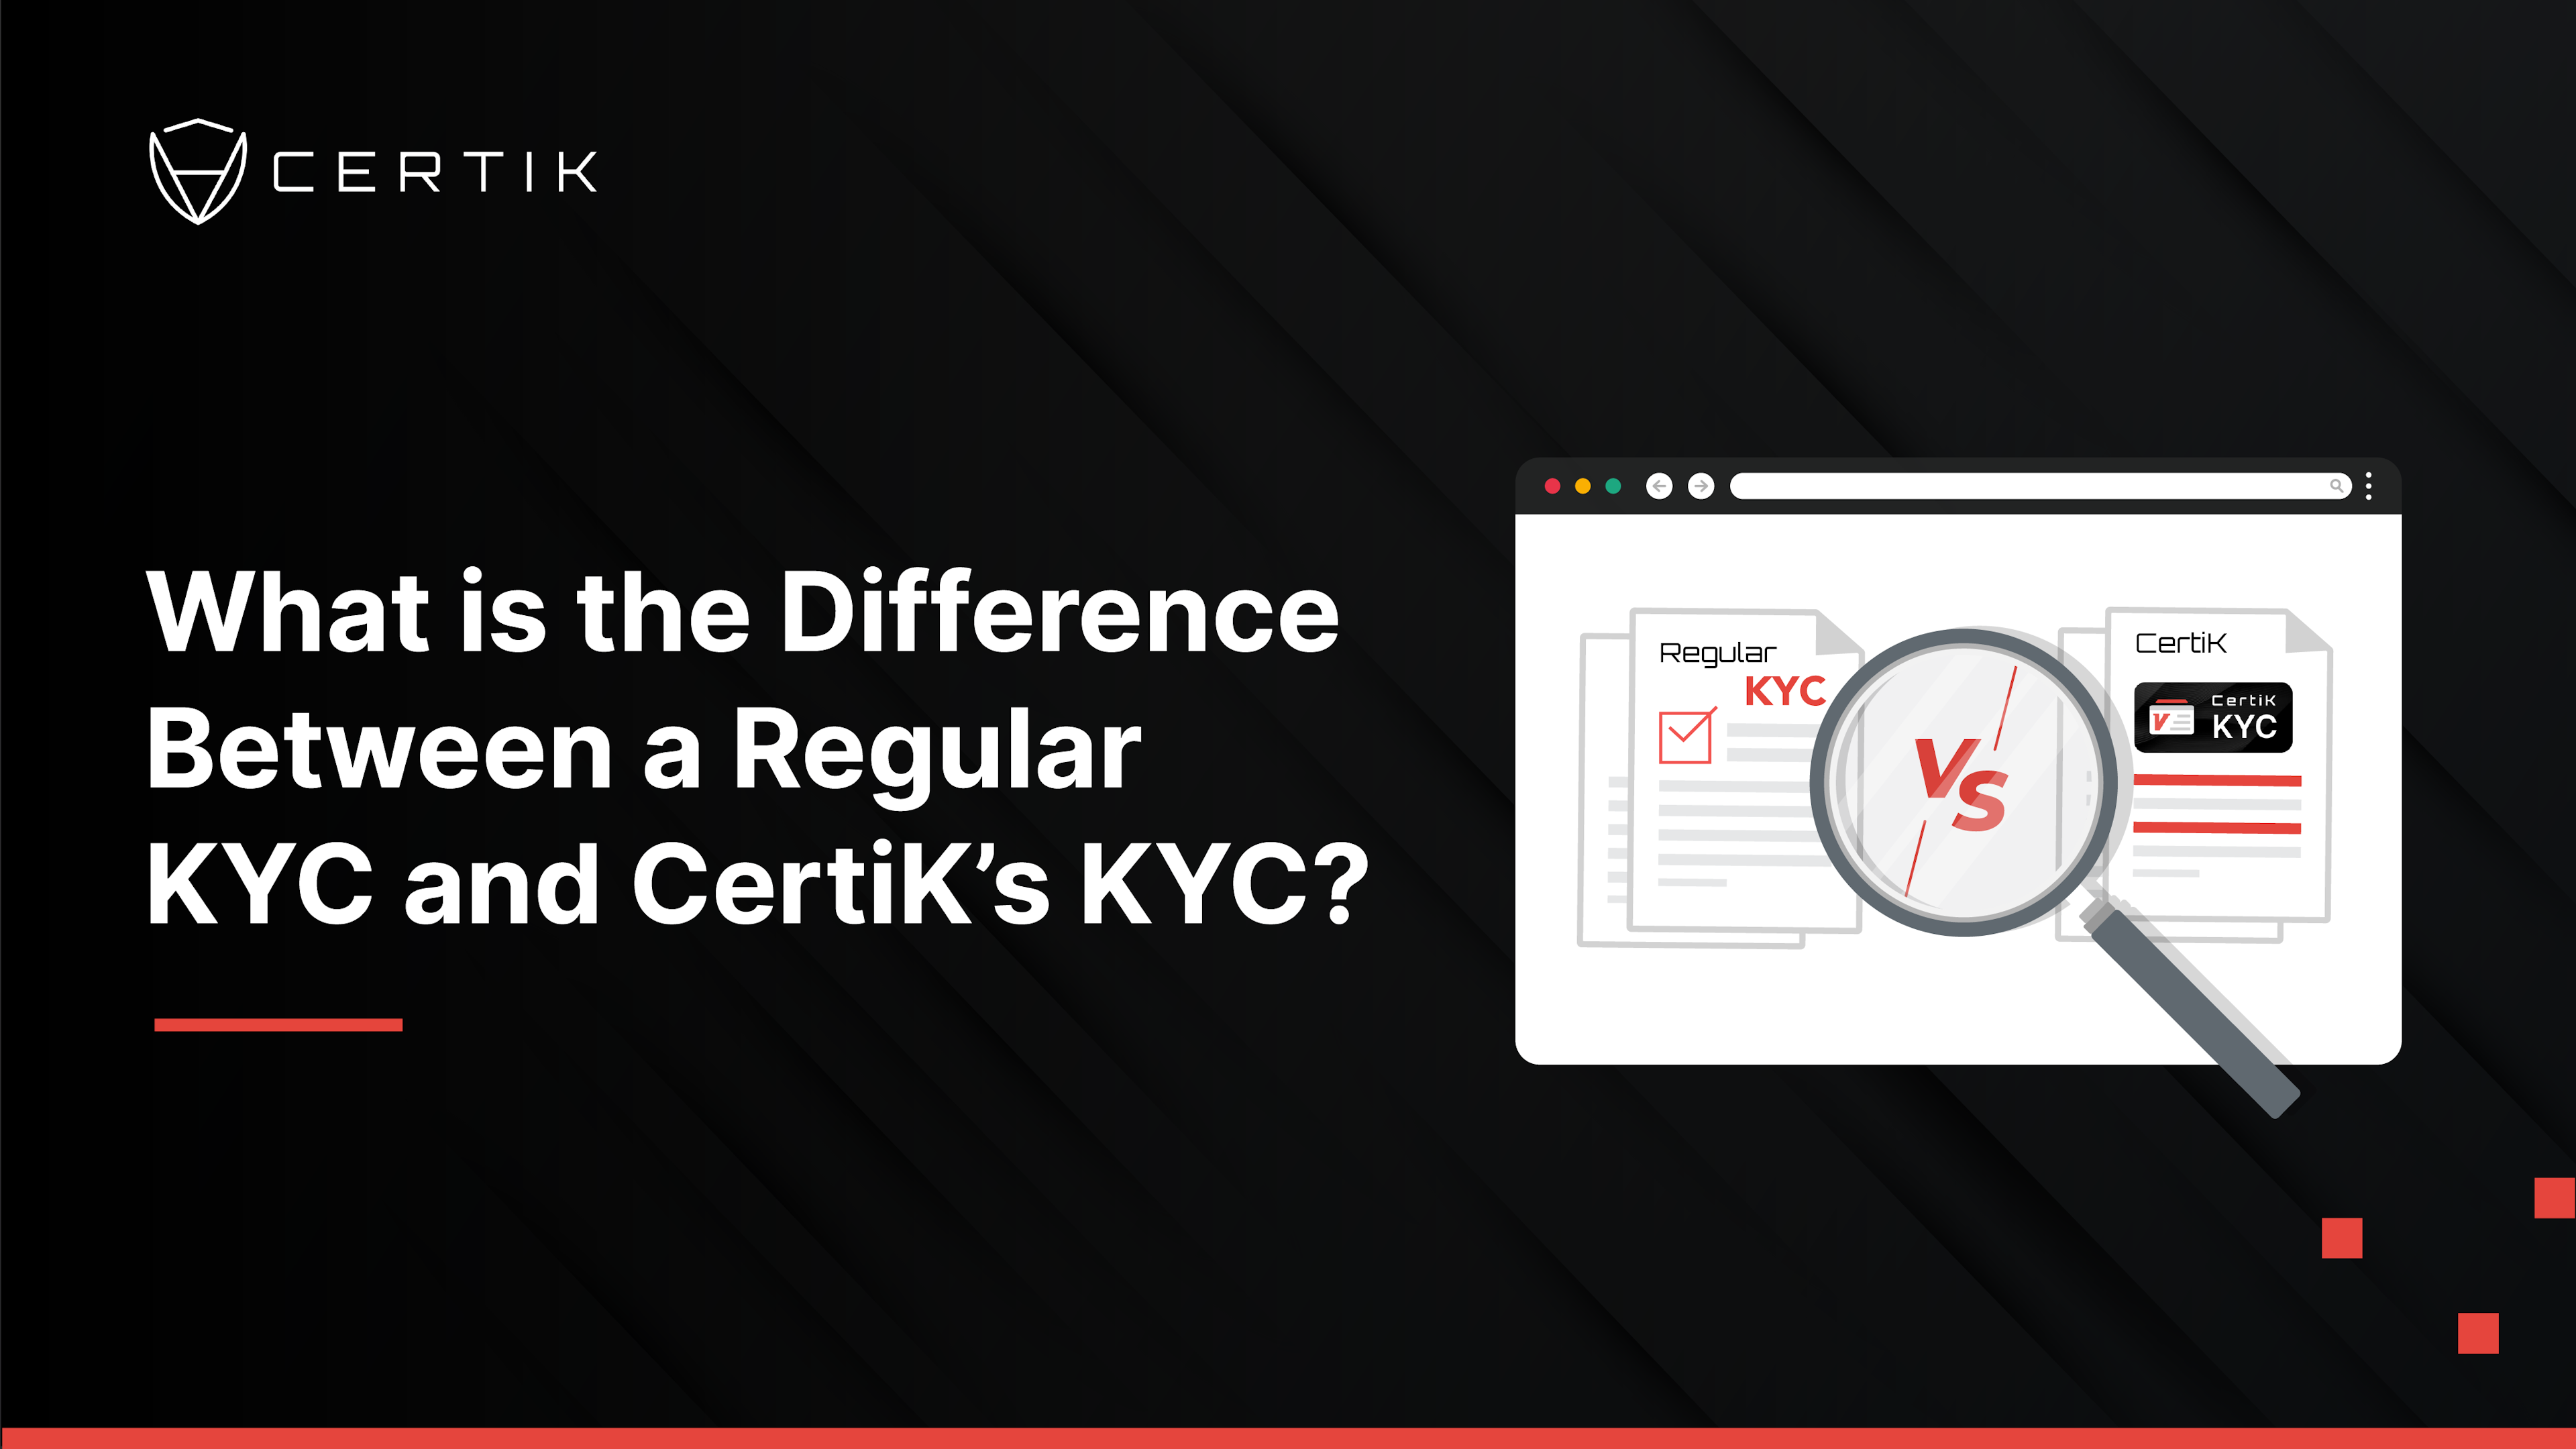 What is the Difference Between a Regular KYC and CertiK’s KYC?